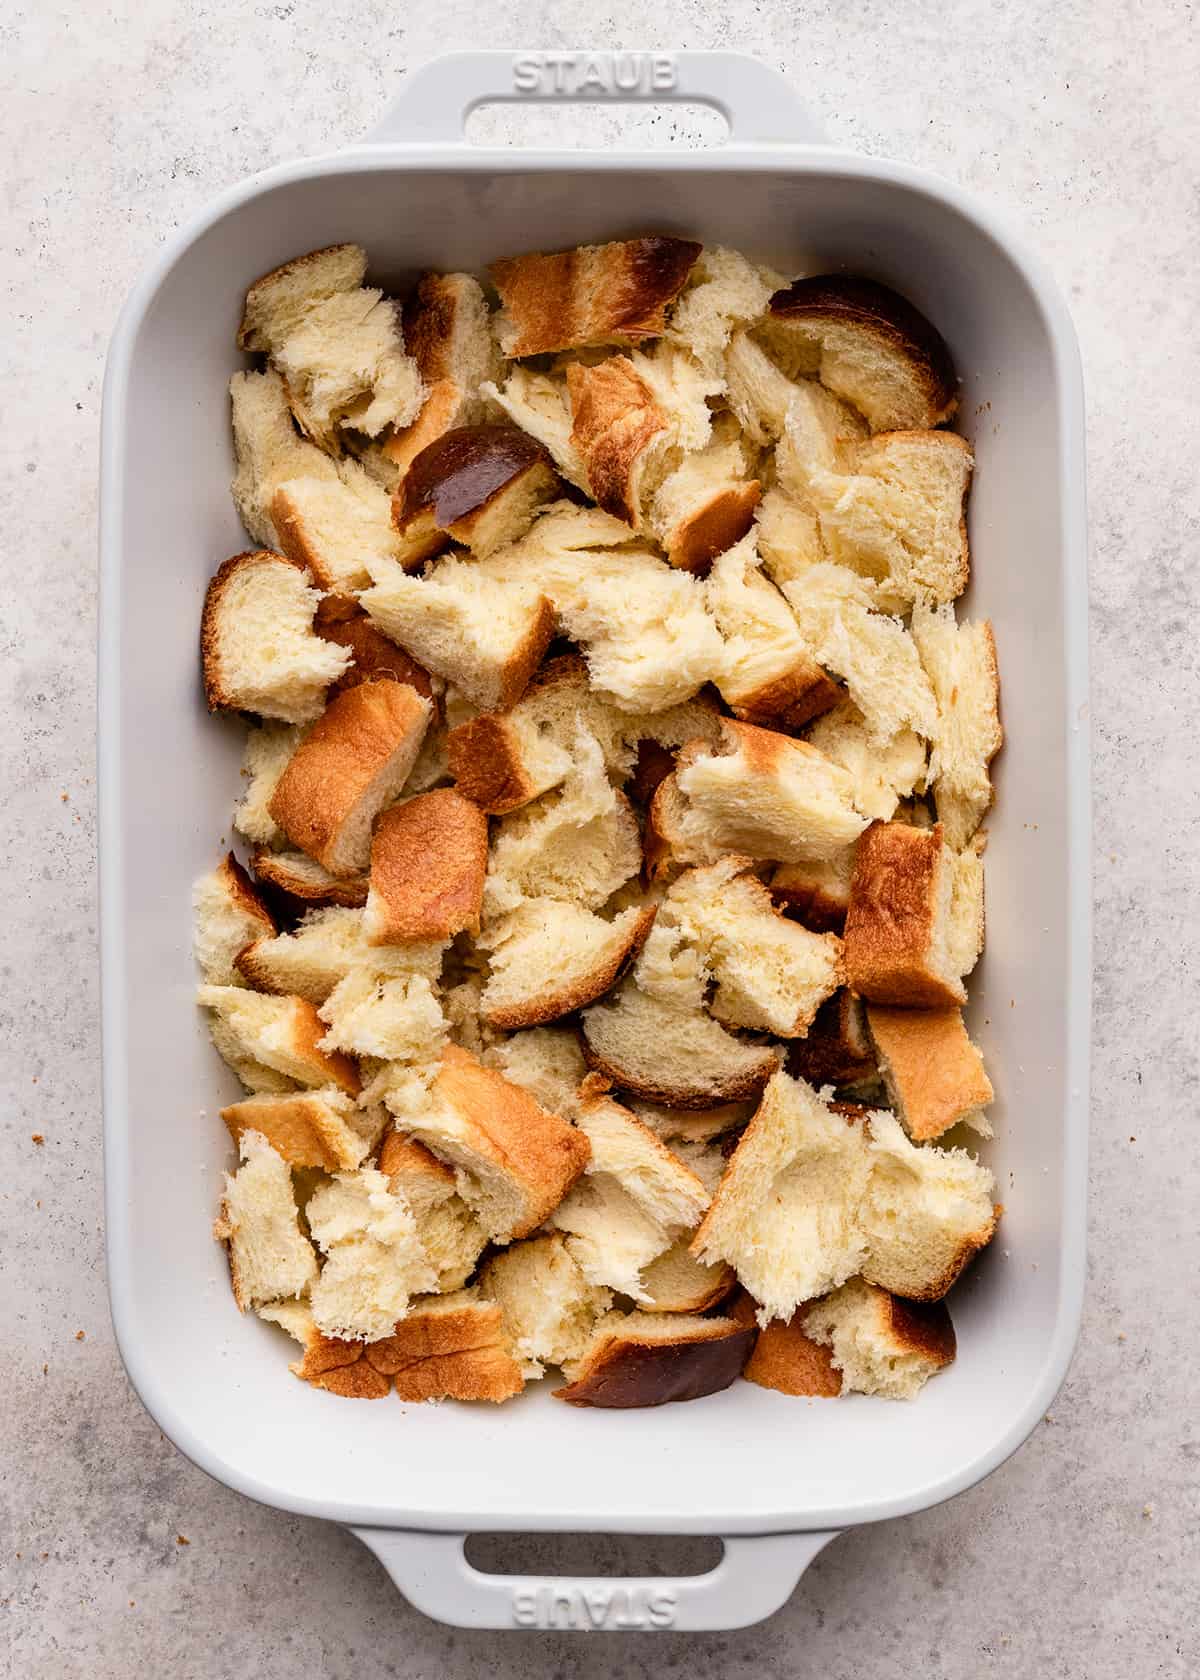 torn pieces of bread in a baking dish